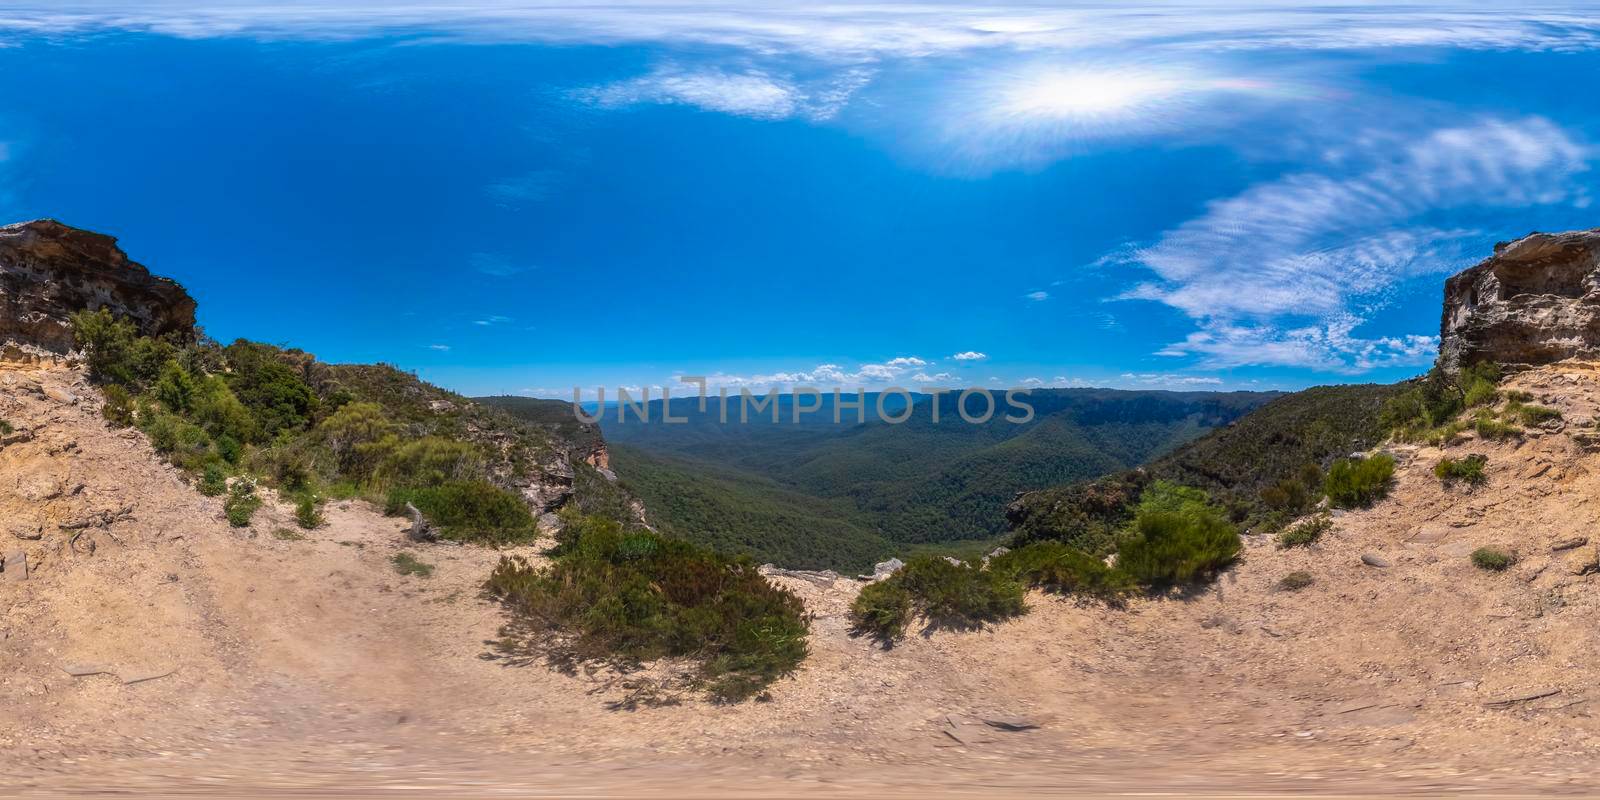 Spherical 360 panorama photograph of the Jamison Valley from Kings Tableland by WittkePhotos